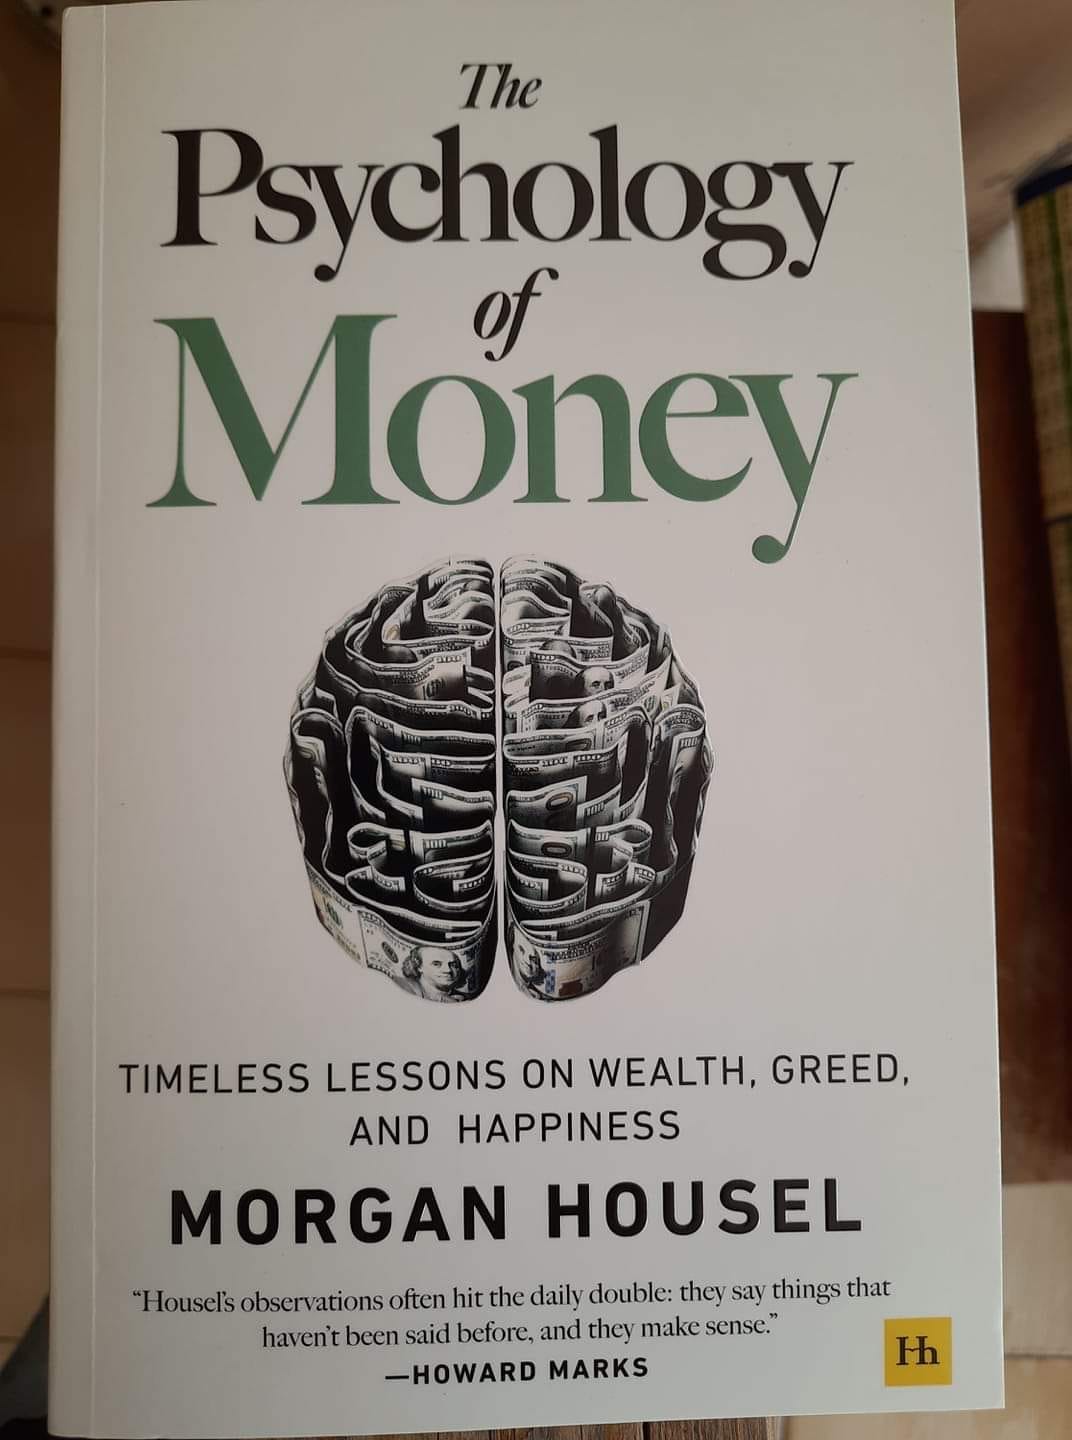 Book Review — The Psychology of Money by Morgan Housel, by 'Tosin Adeoti